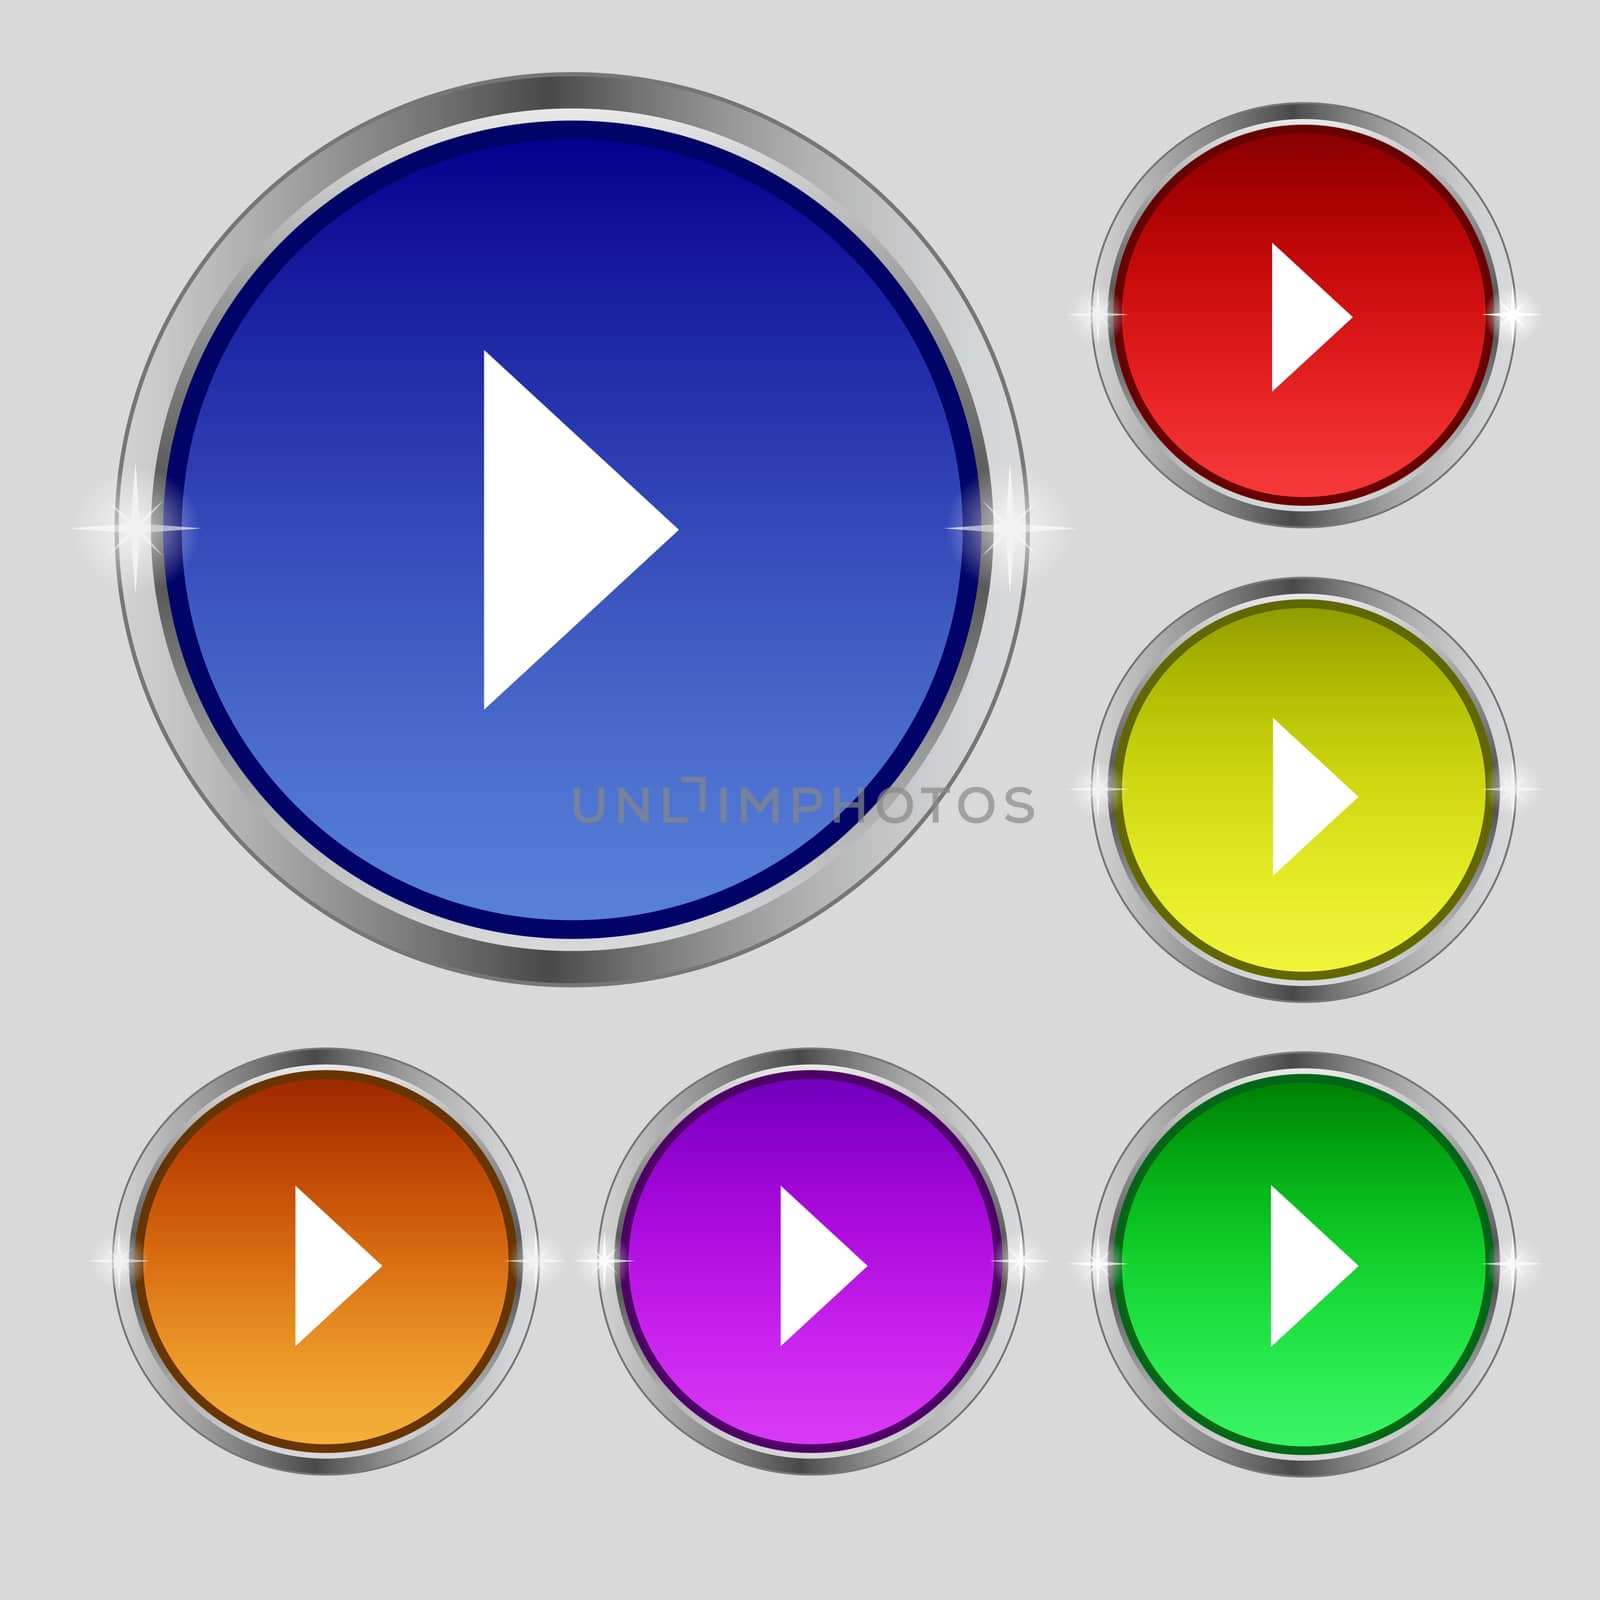 play button icon sign. Round symbol on bright colourful buttons. illustration